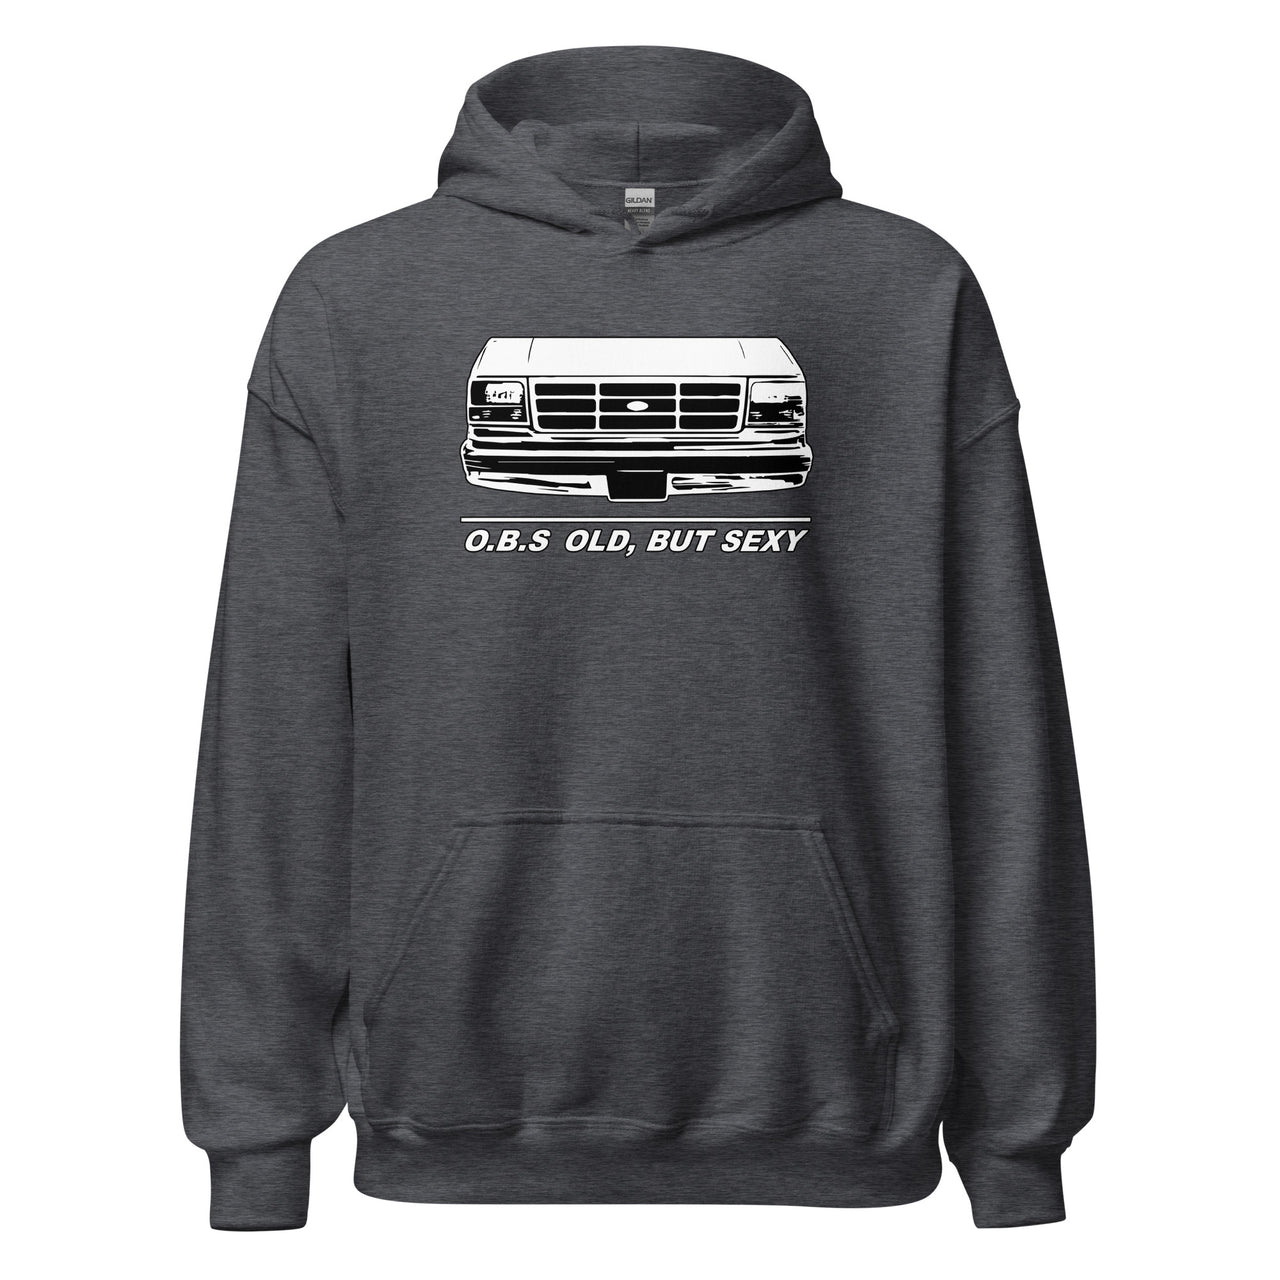 OBS Truck - Old, But Sexy Hoodie in grey